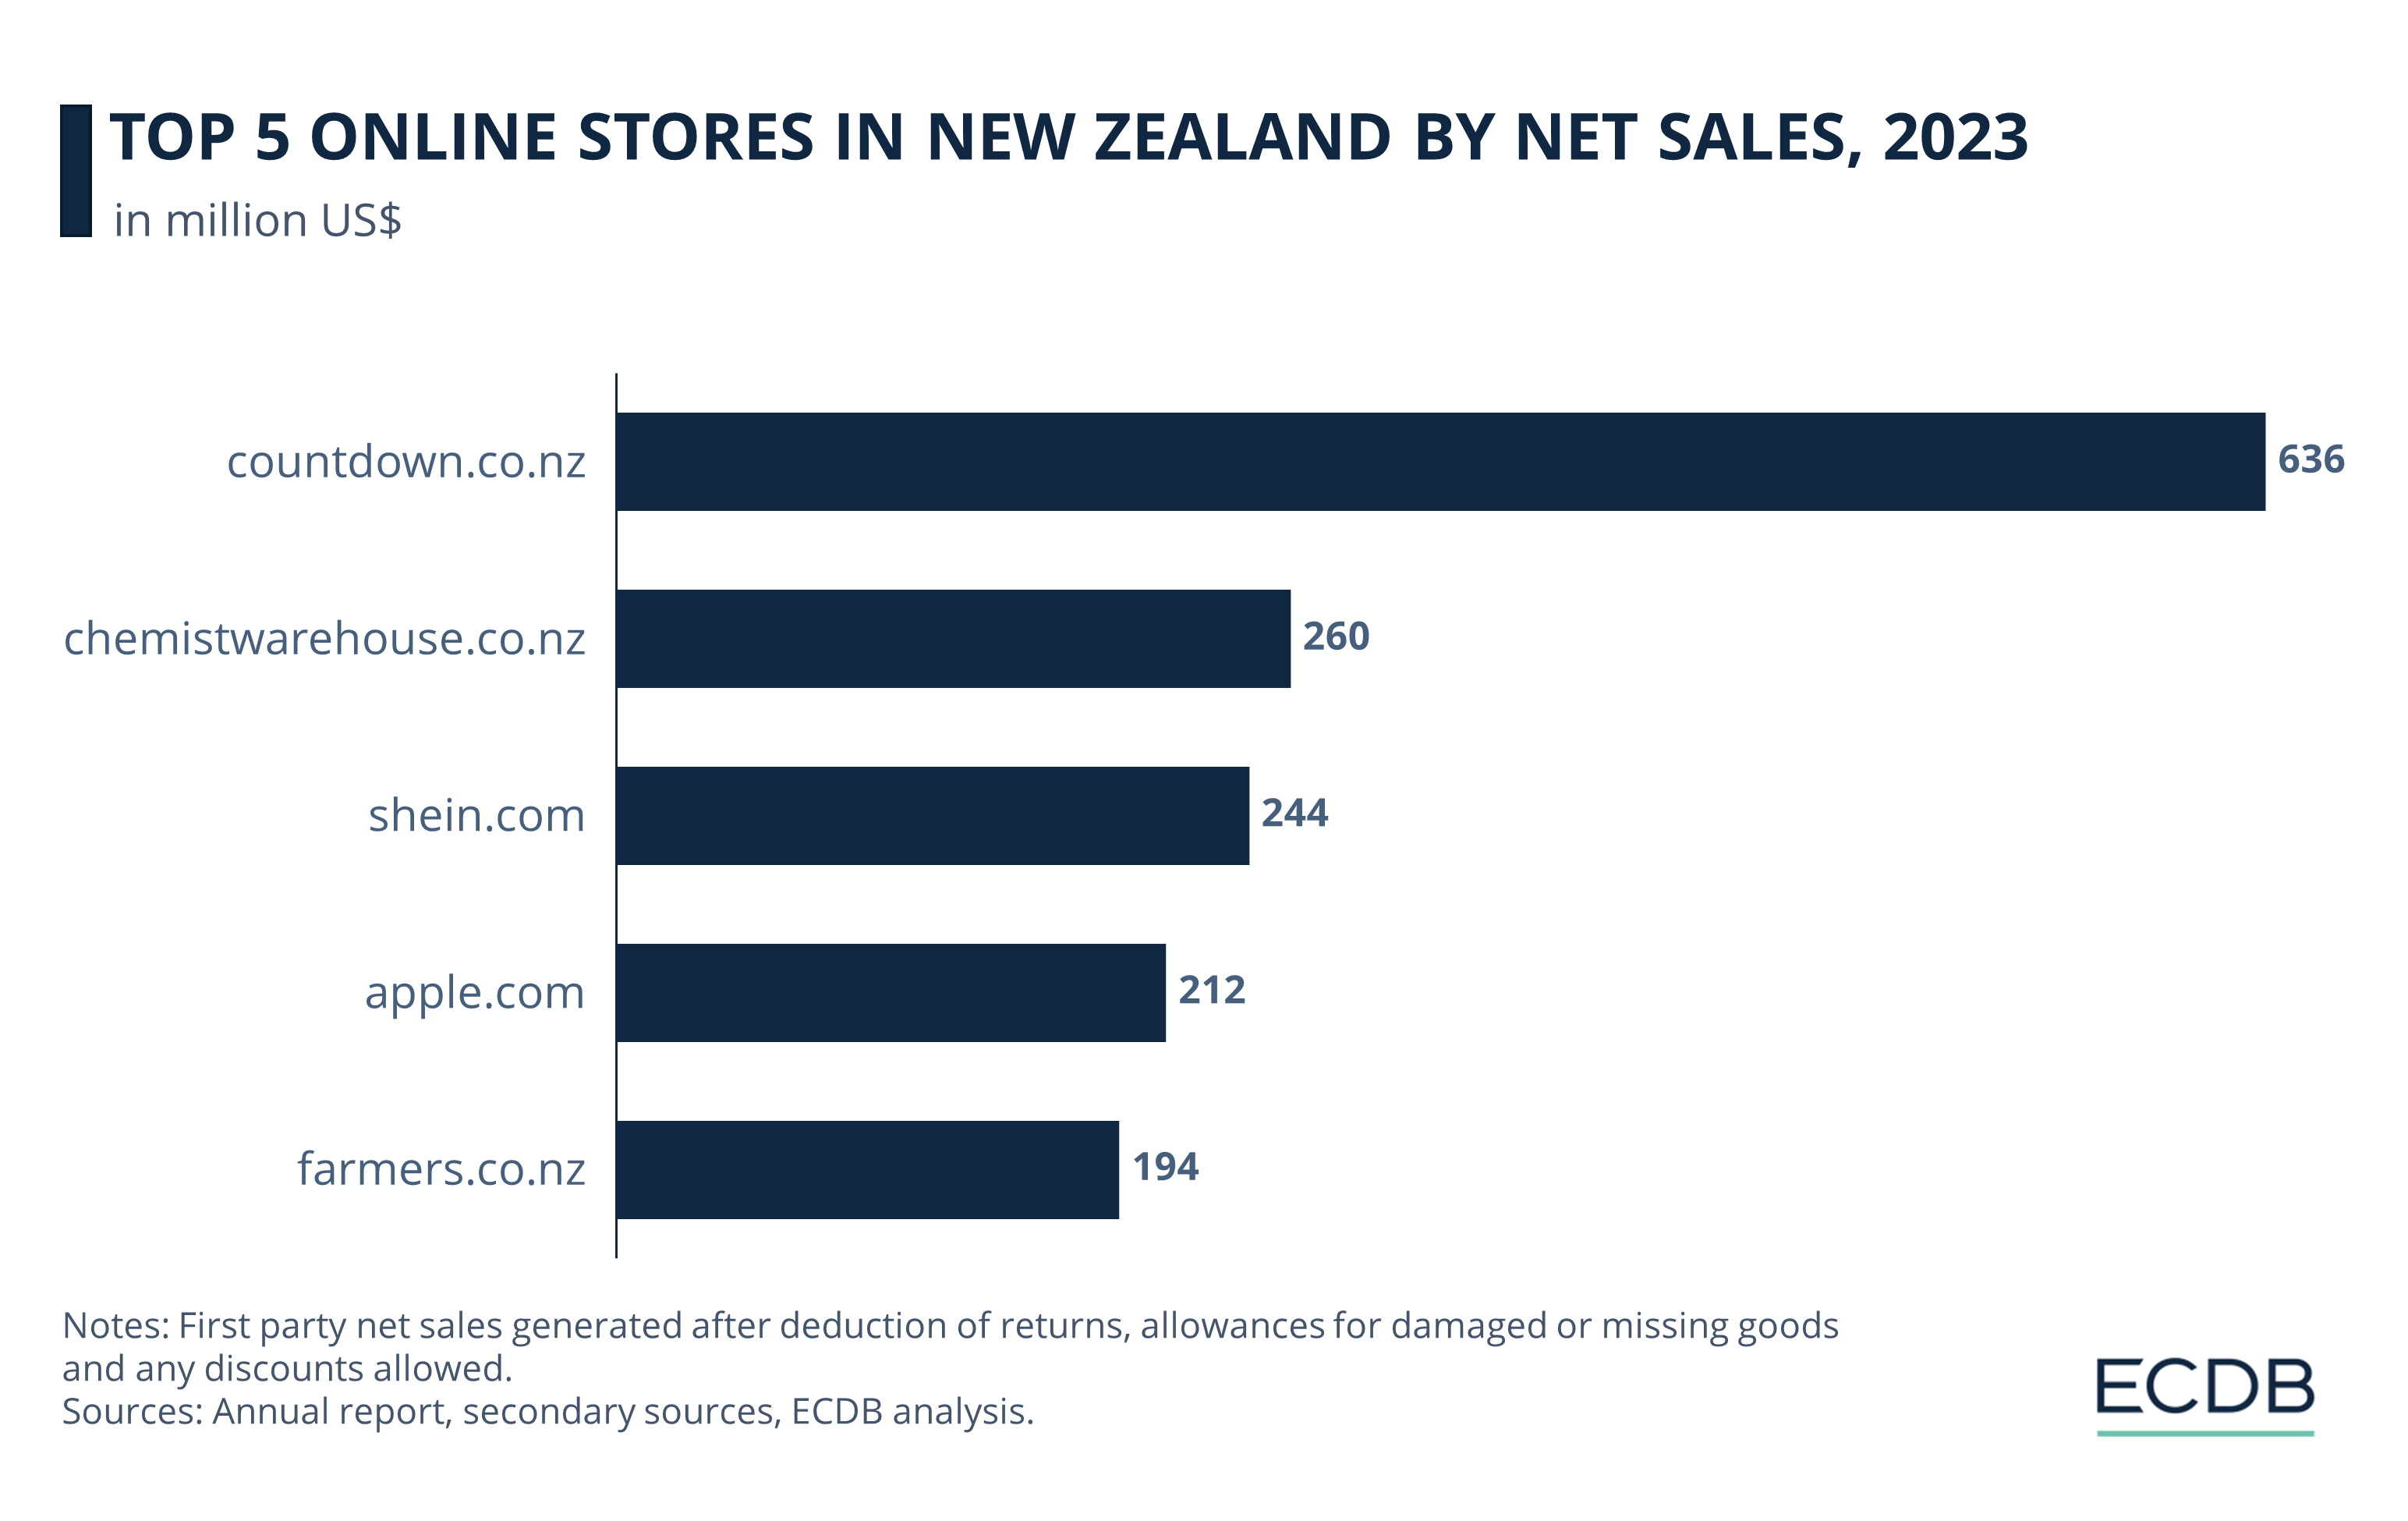 Top 5 Online Stores in New Zealand by Net Sales, 2023